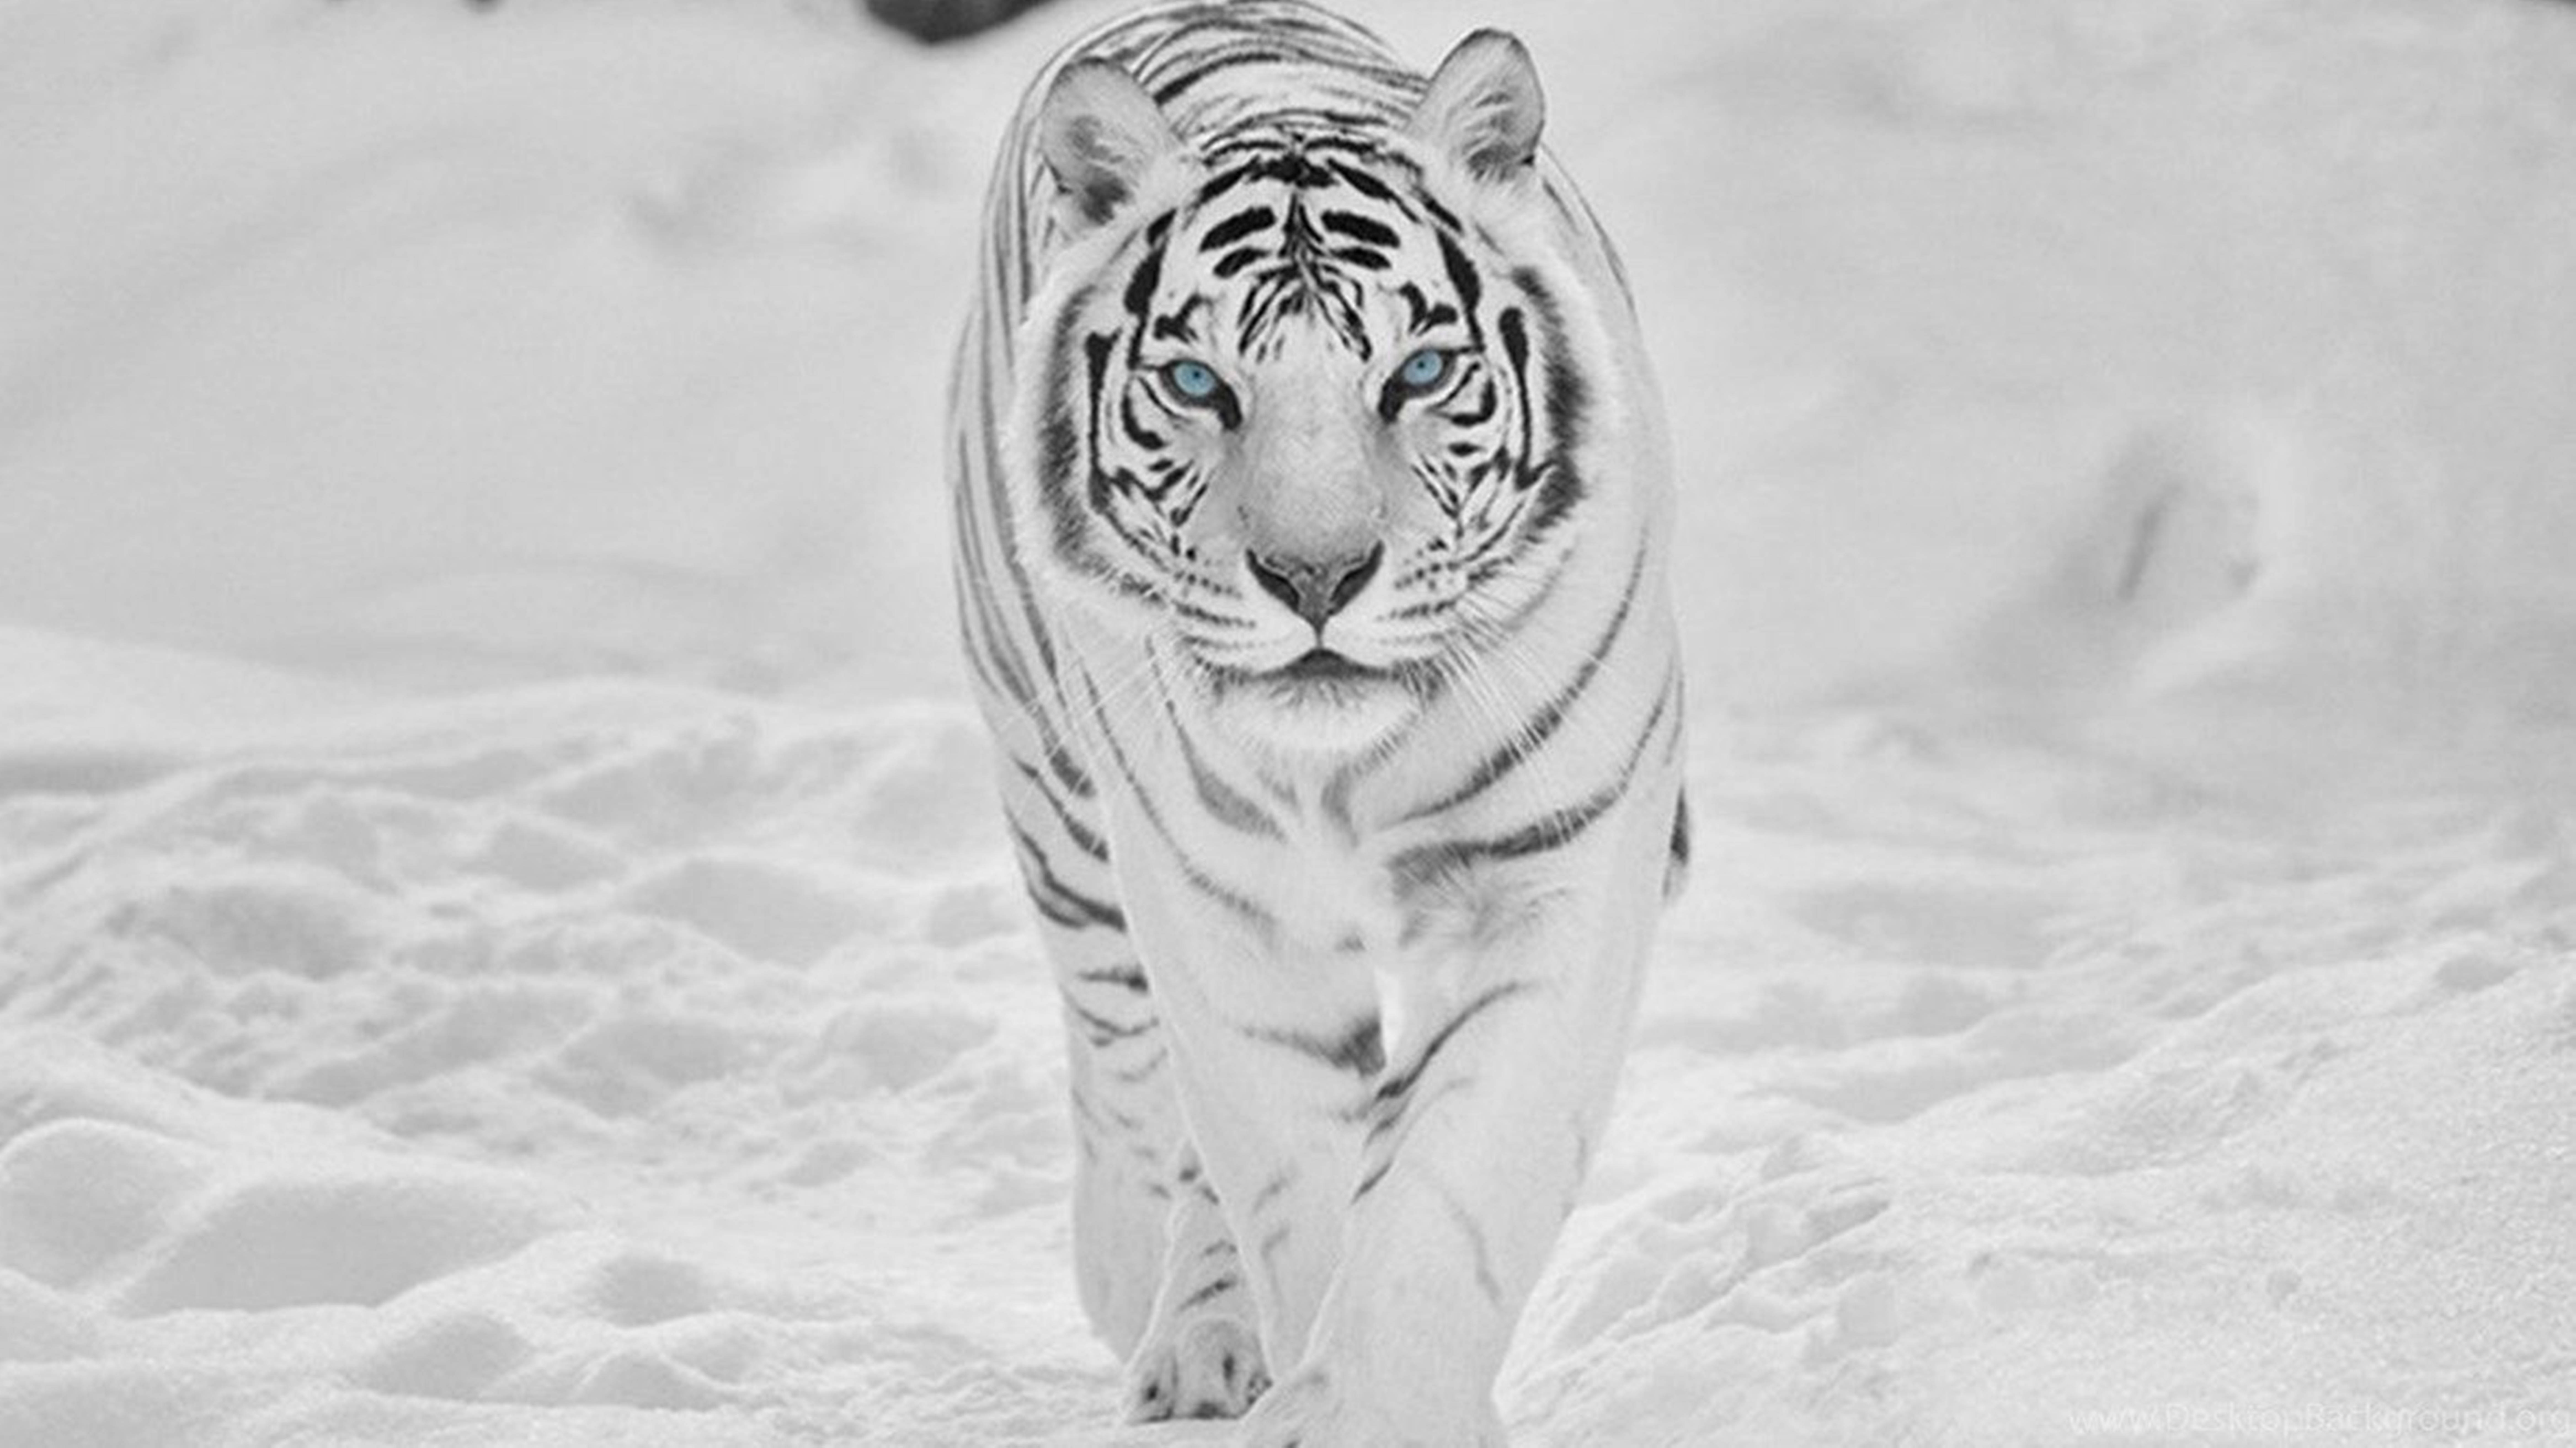 8k Tiger Uhd In Snow Picture